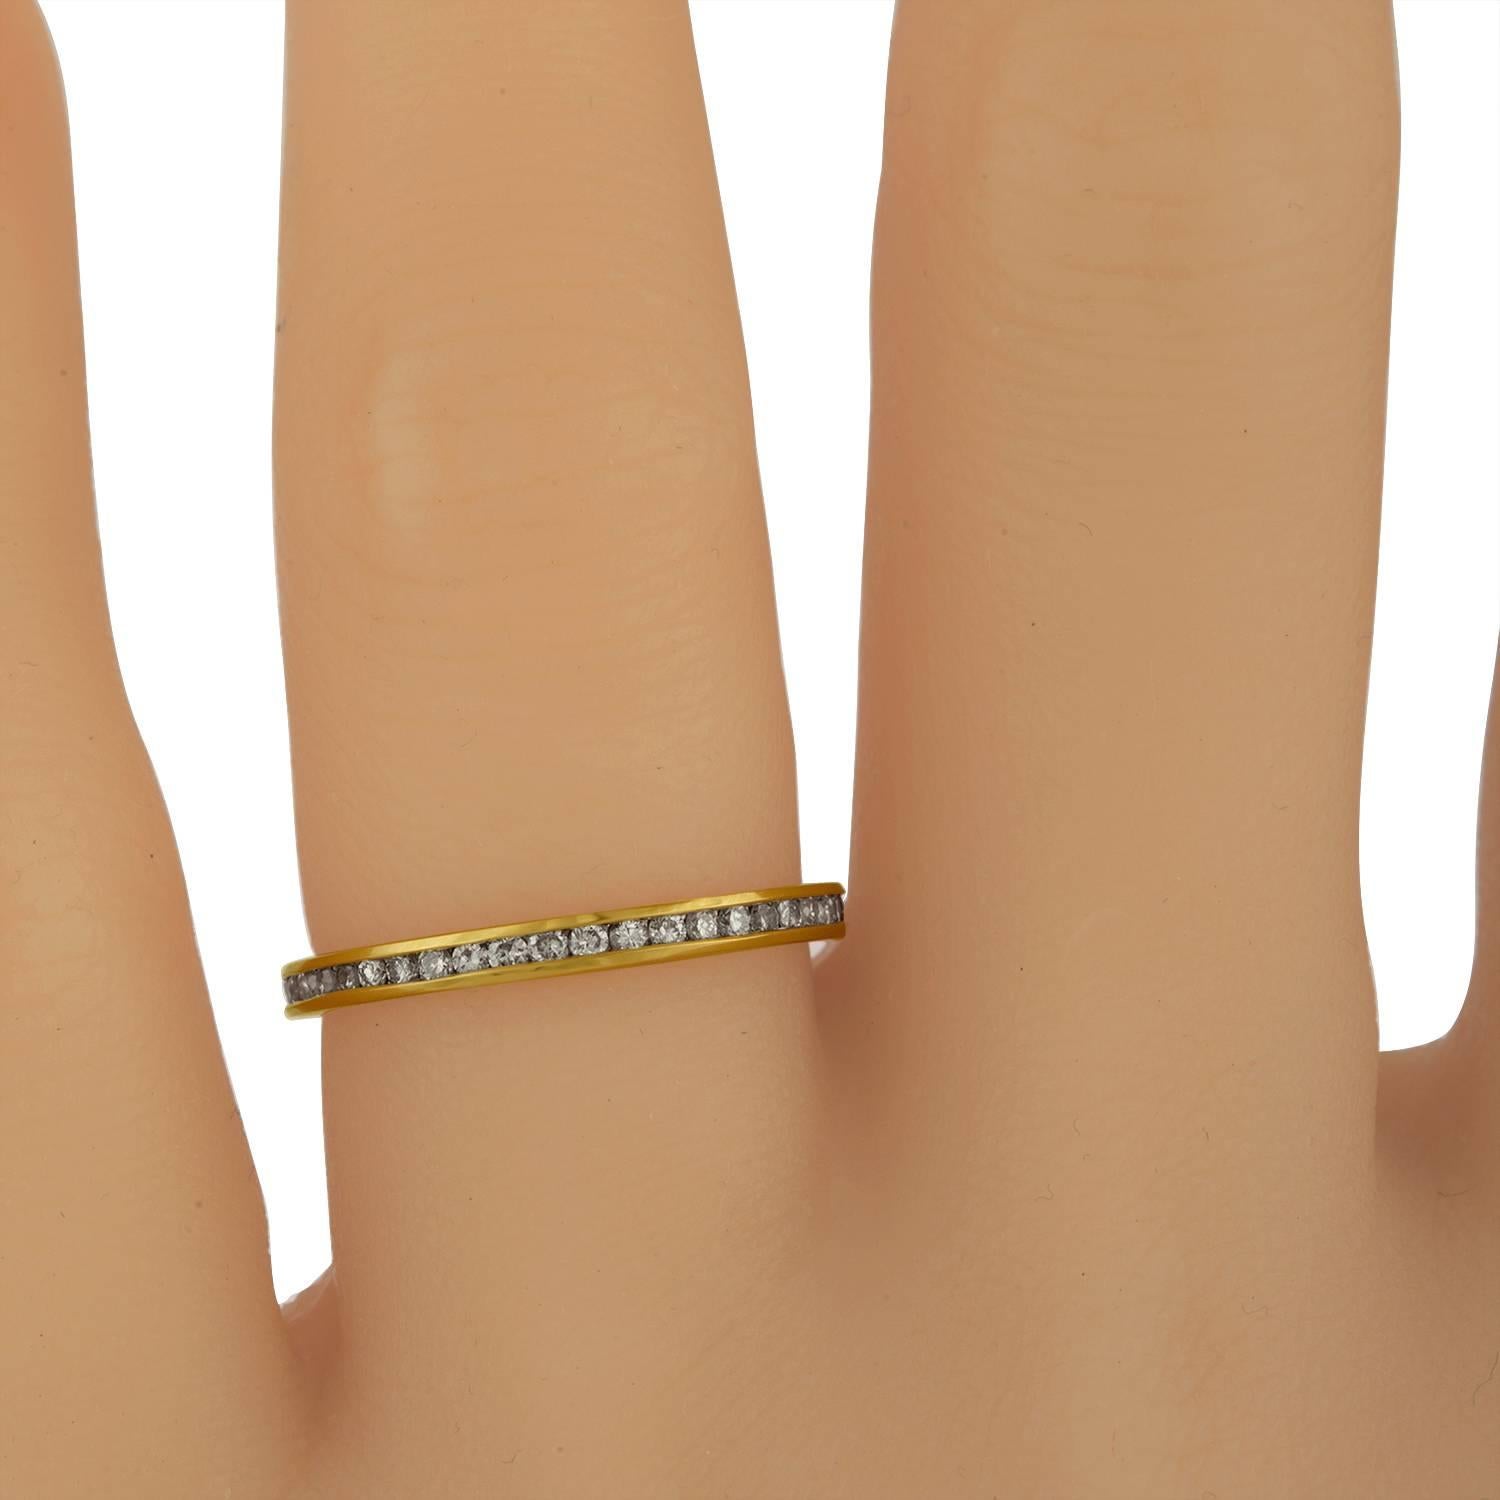 Yellow Gold Wedding band with 0.75 Carat Total Weight of Diamonds set all around in Basel Set Style.
The Diamonds are Shining through the Yellow Gold Wedding Band Estimated to be G in Color and VS in Clarity.
The ring is size 6.